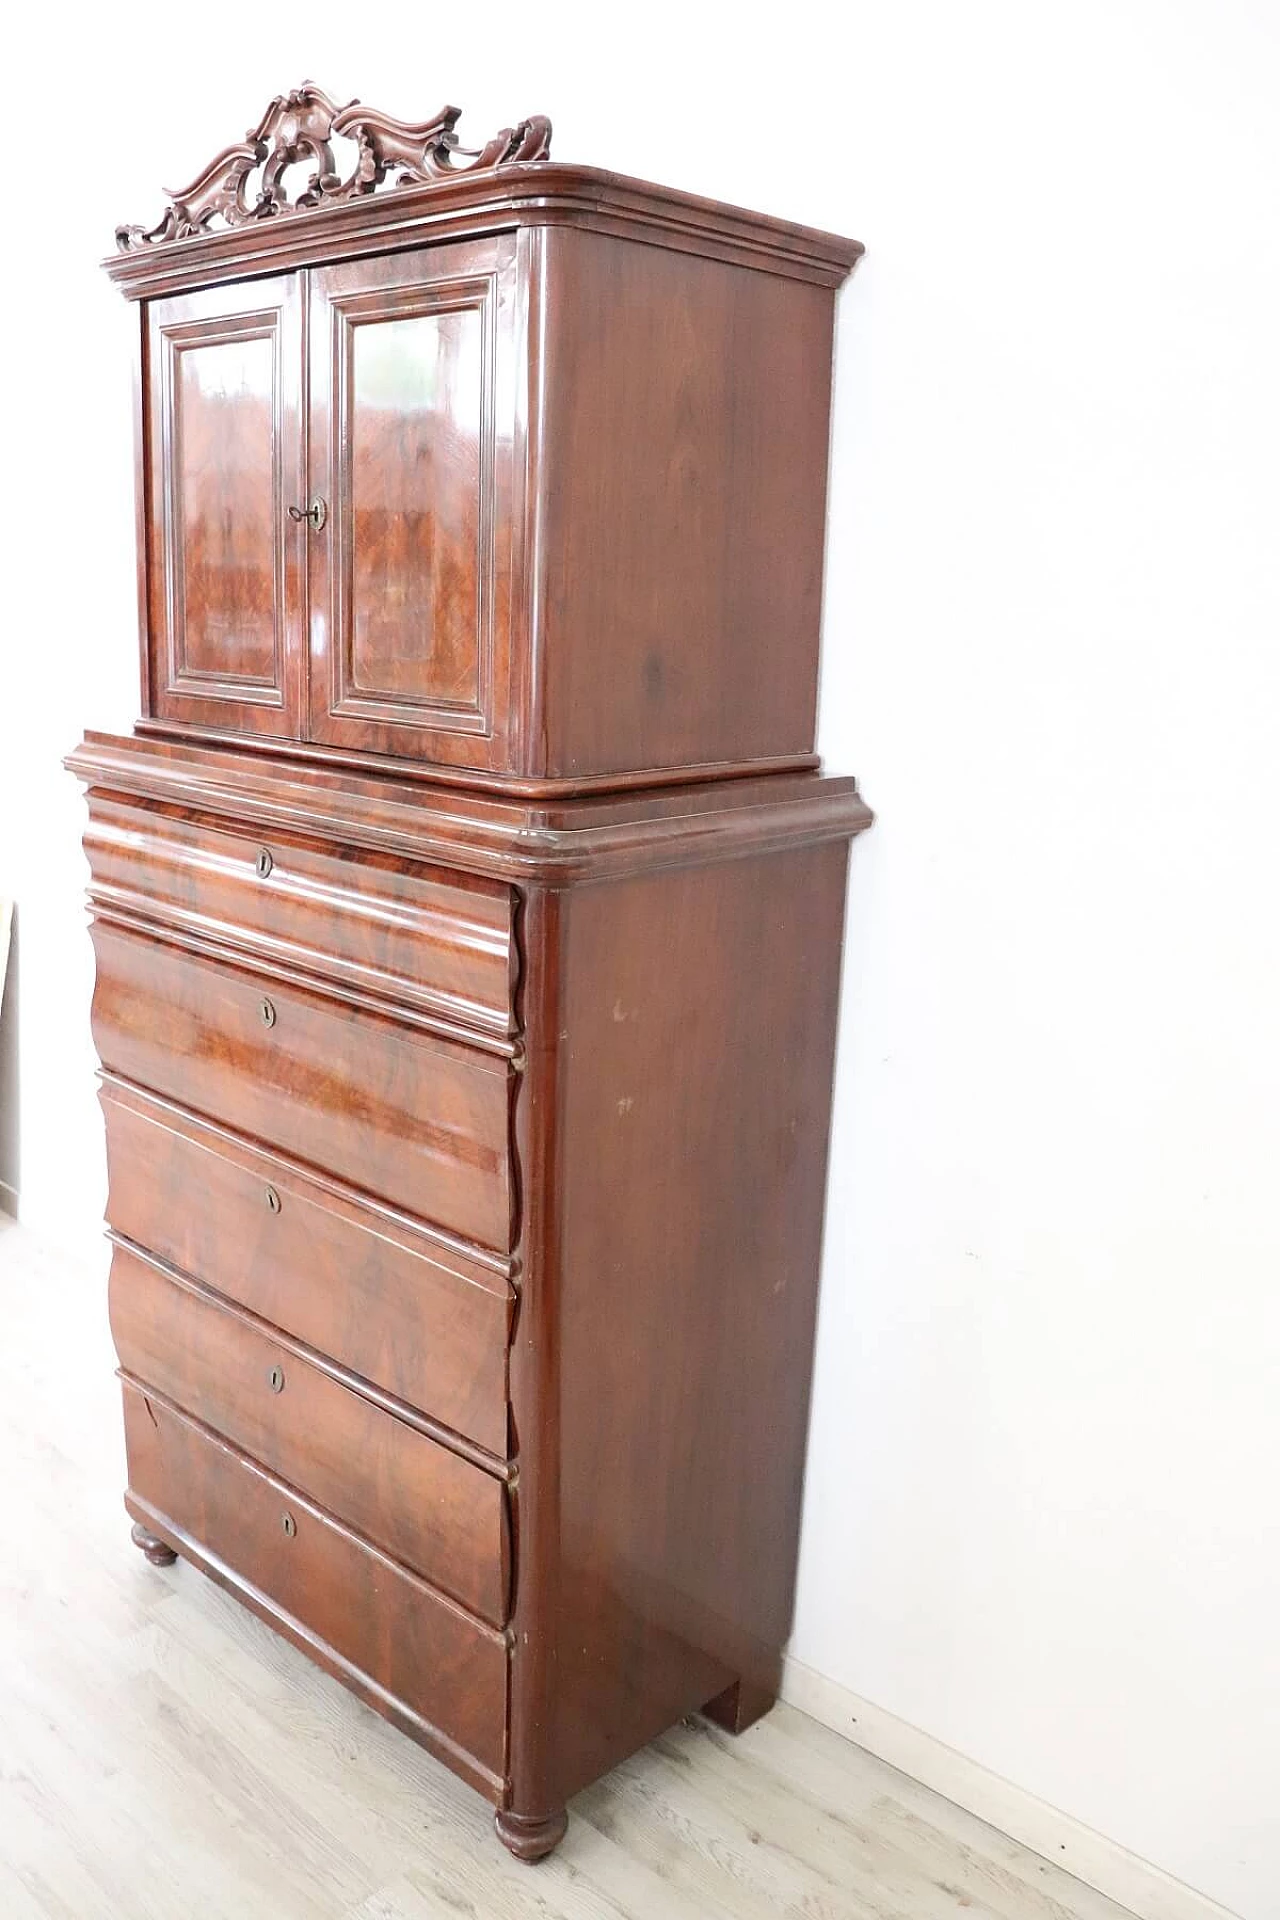 Antique chest of drawers with mahogany riser, 19th century 1067725